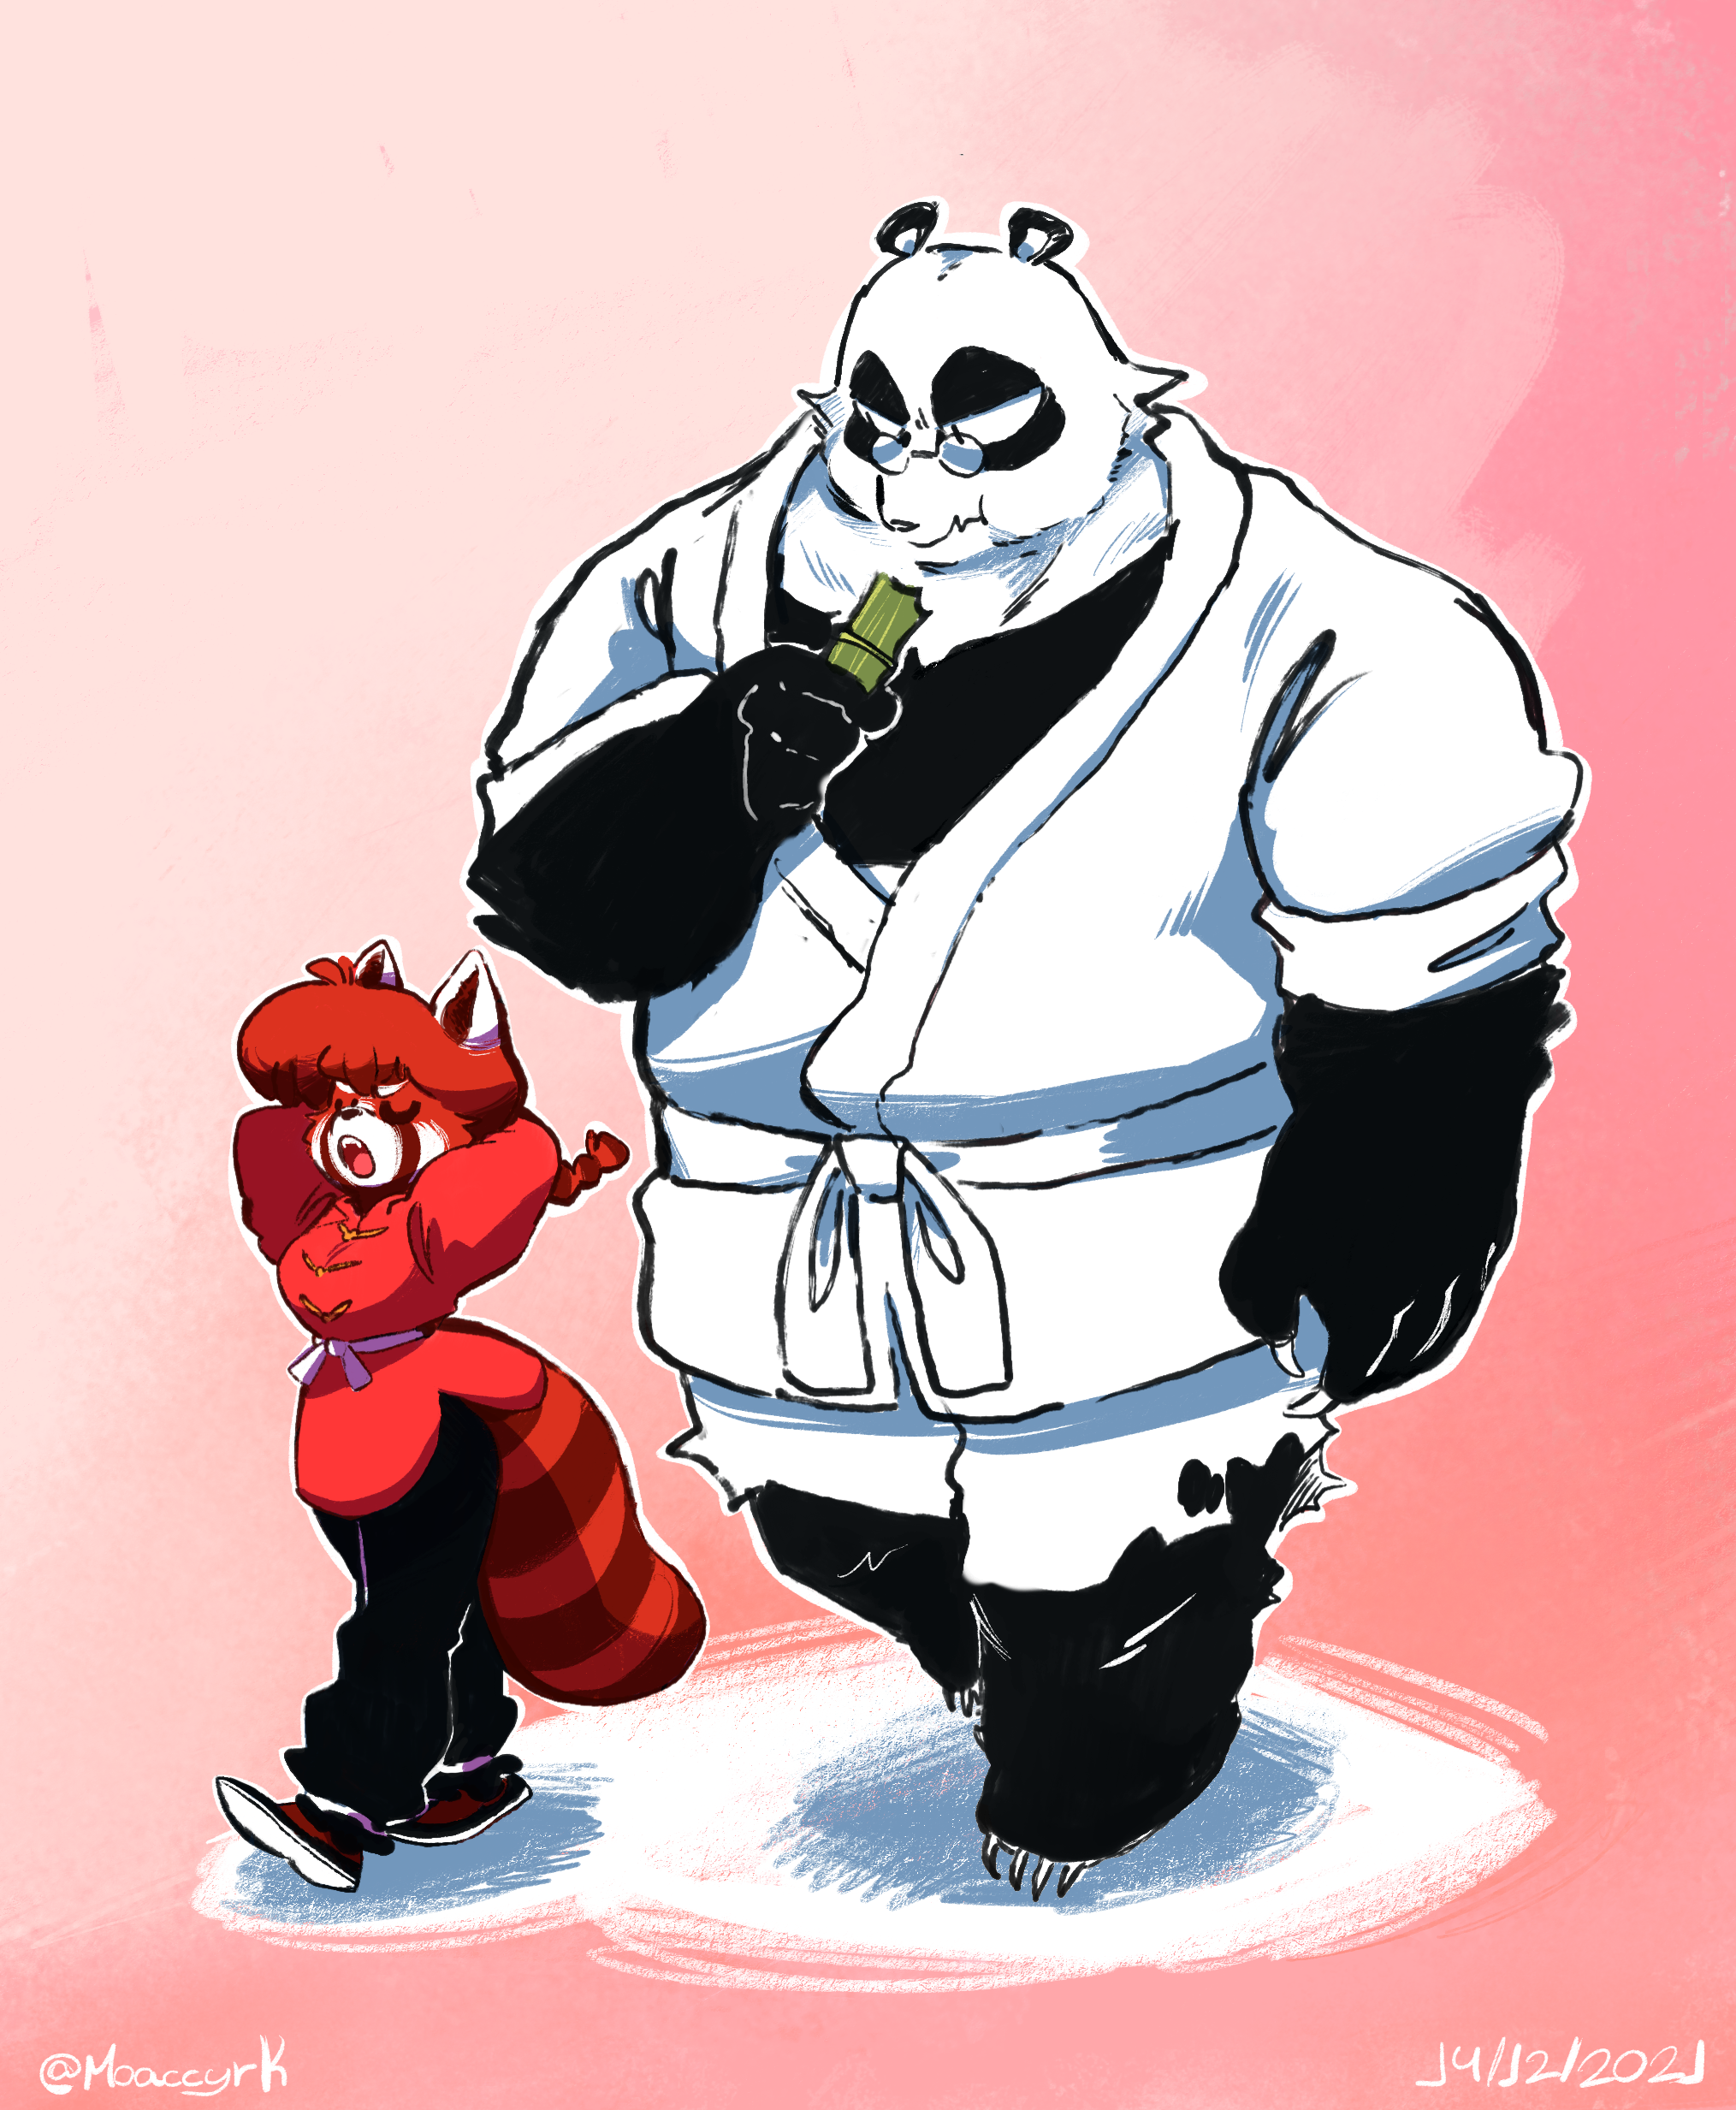 an illustration of Saotome Ranma and Saotome Genma as anthropomorphic pandas. Ranma appears to be a petite red panda girl, while her father Genma is a very tall and broad giant panda man.